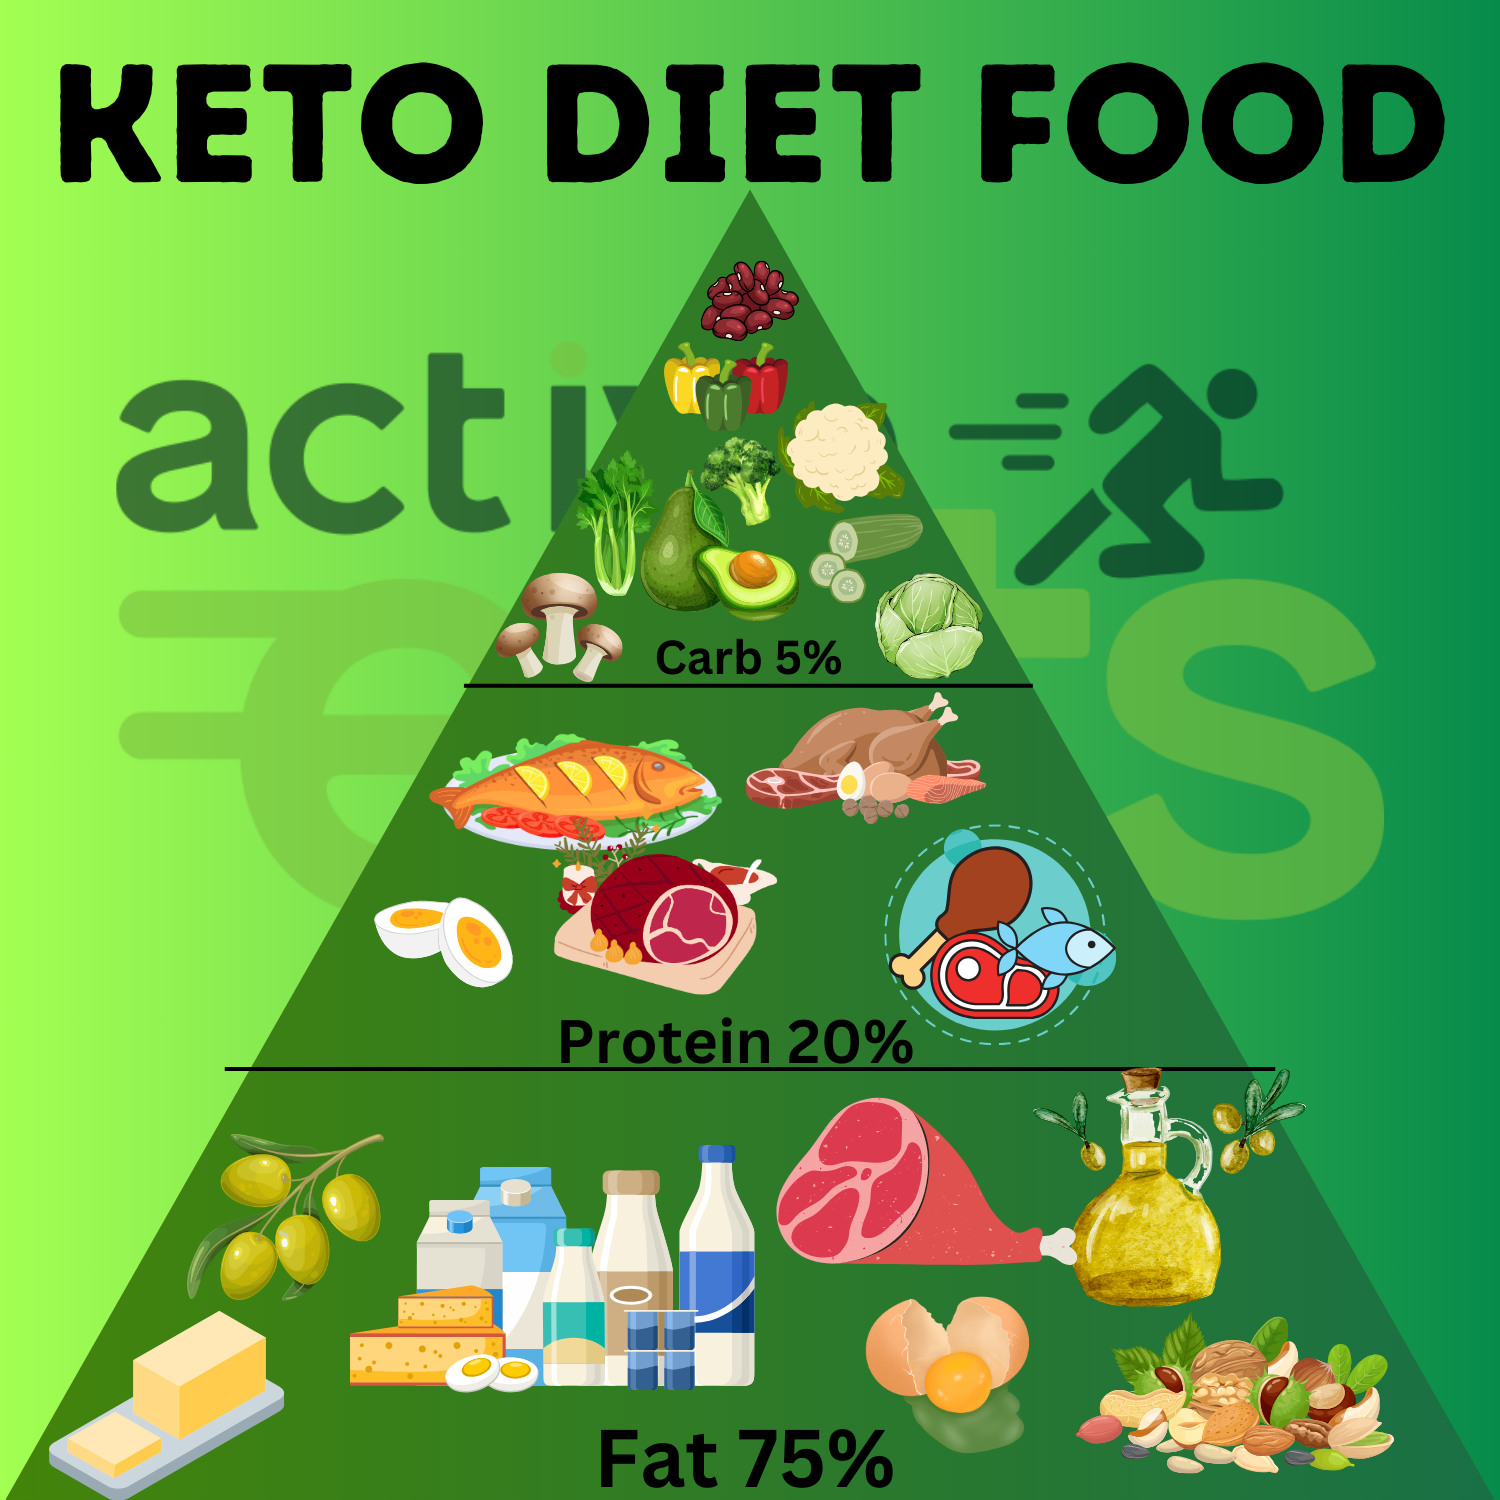 The ketogenic (keto) diet primarily consists of high-fat, low-carbohydrate foods. Key items include meats, fish, eggs, nuts, seeds, avocados, and oils like olive and coconut. Non-starchy vegetables such as spinach and broccoli are encouraged. Avoid high-carb foods like grains, sugar, and most fruits to maintain a state of ketosis, where the body burns fat for fuel.